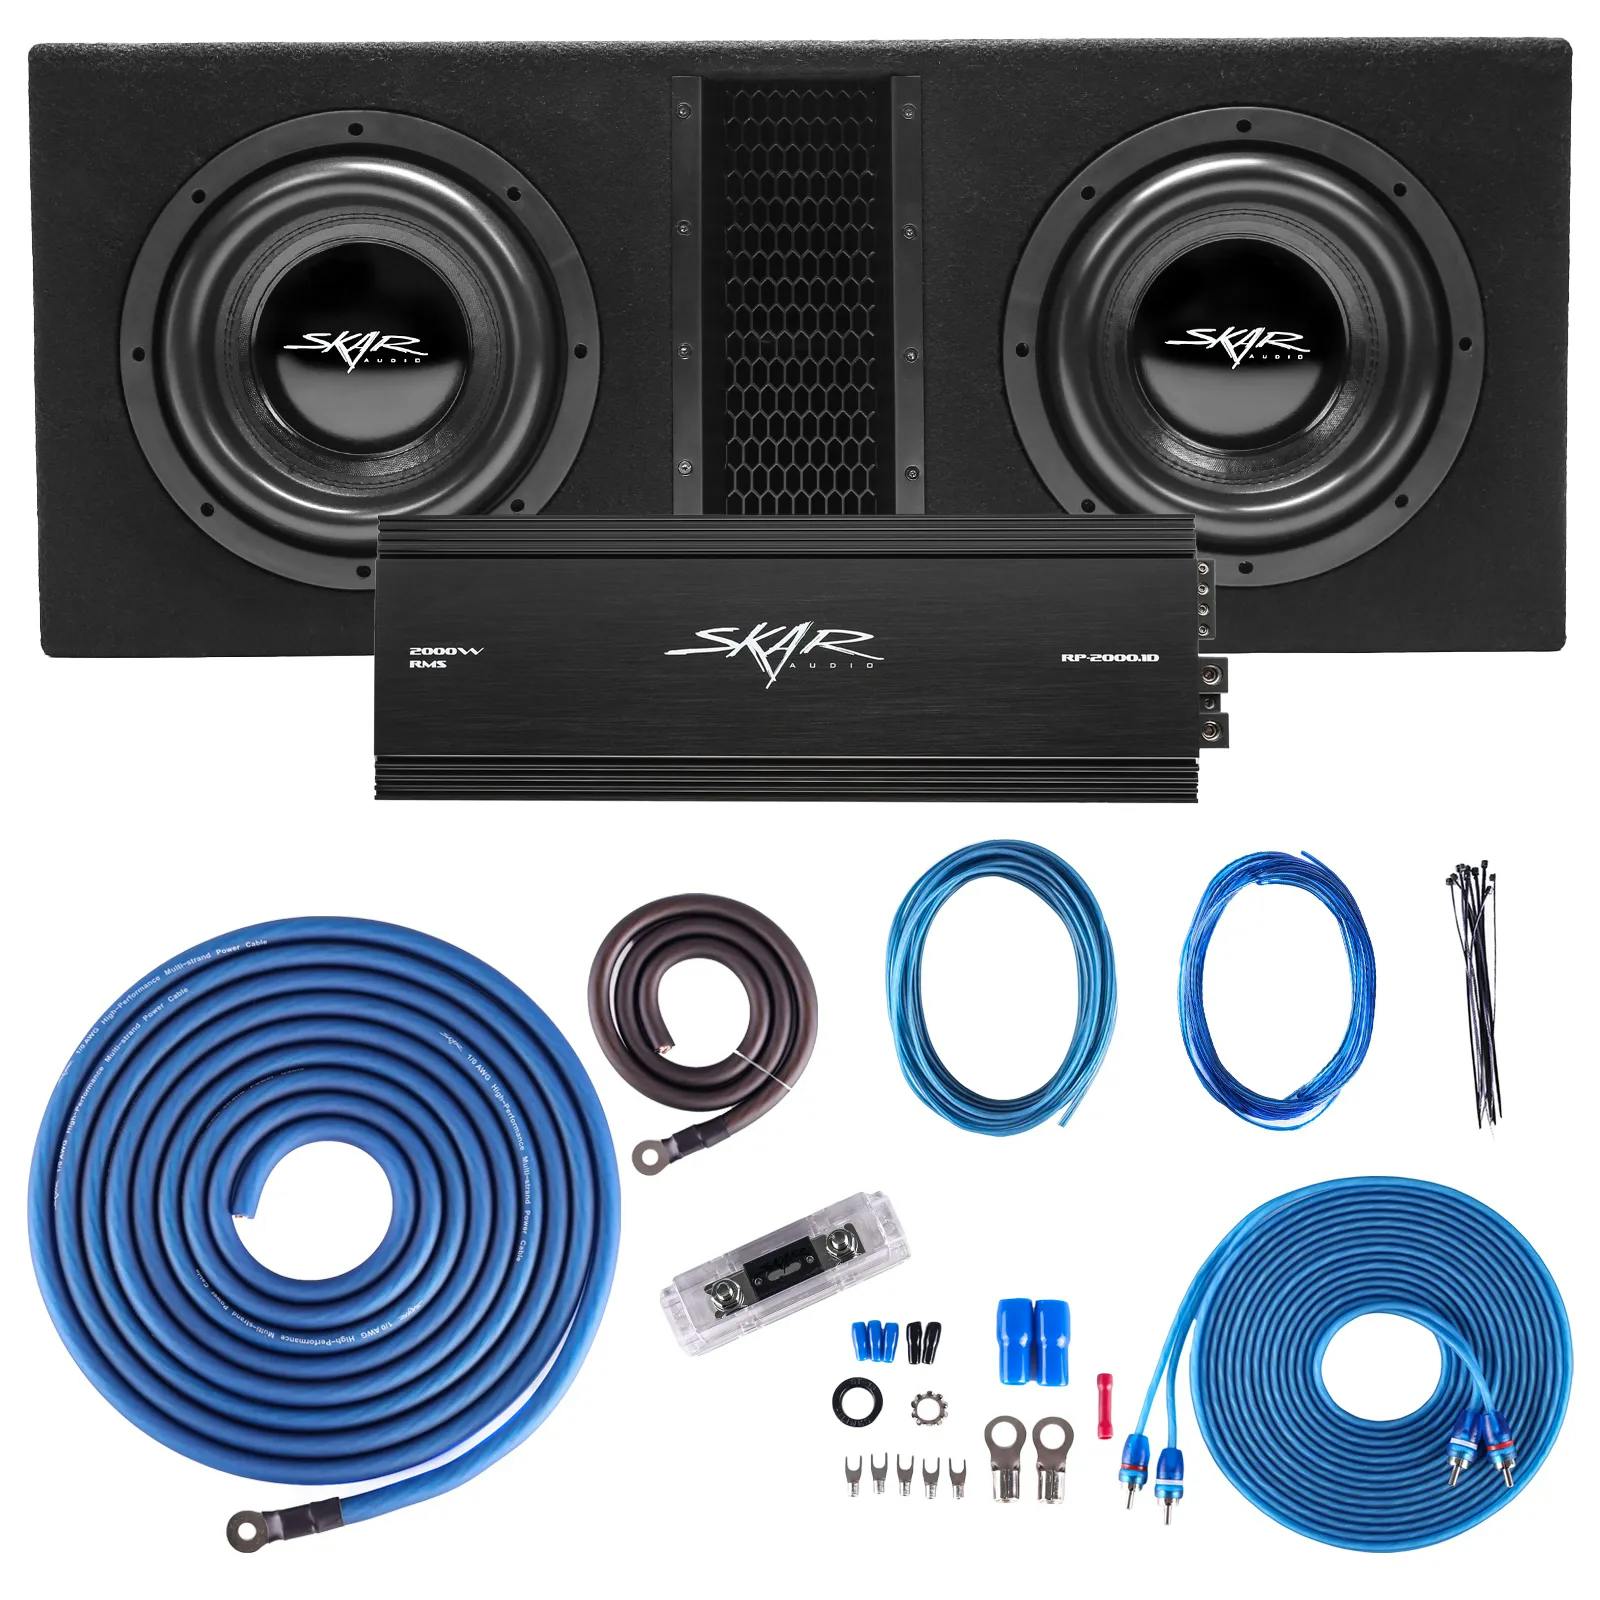 Featured Product Photo for Dual 10" 4,000 Watt EVL Series Complete Subwoofer Package with Vented Enclosure and Amplifier